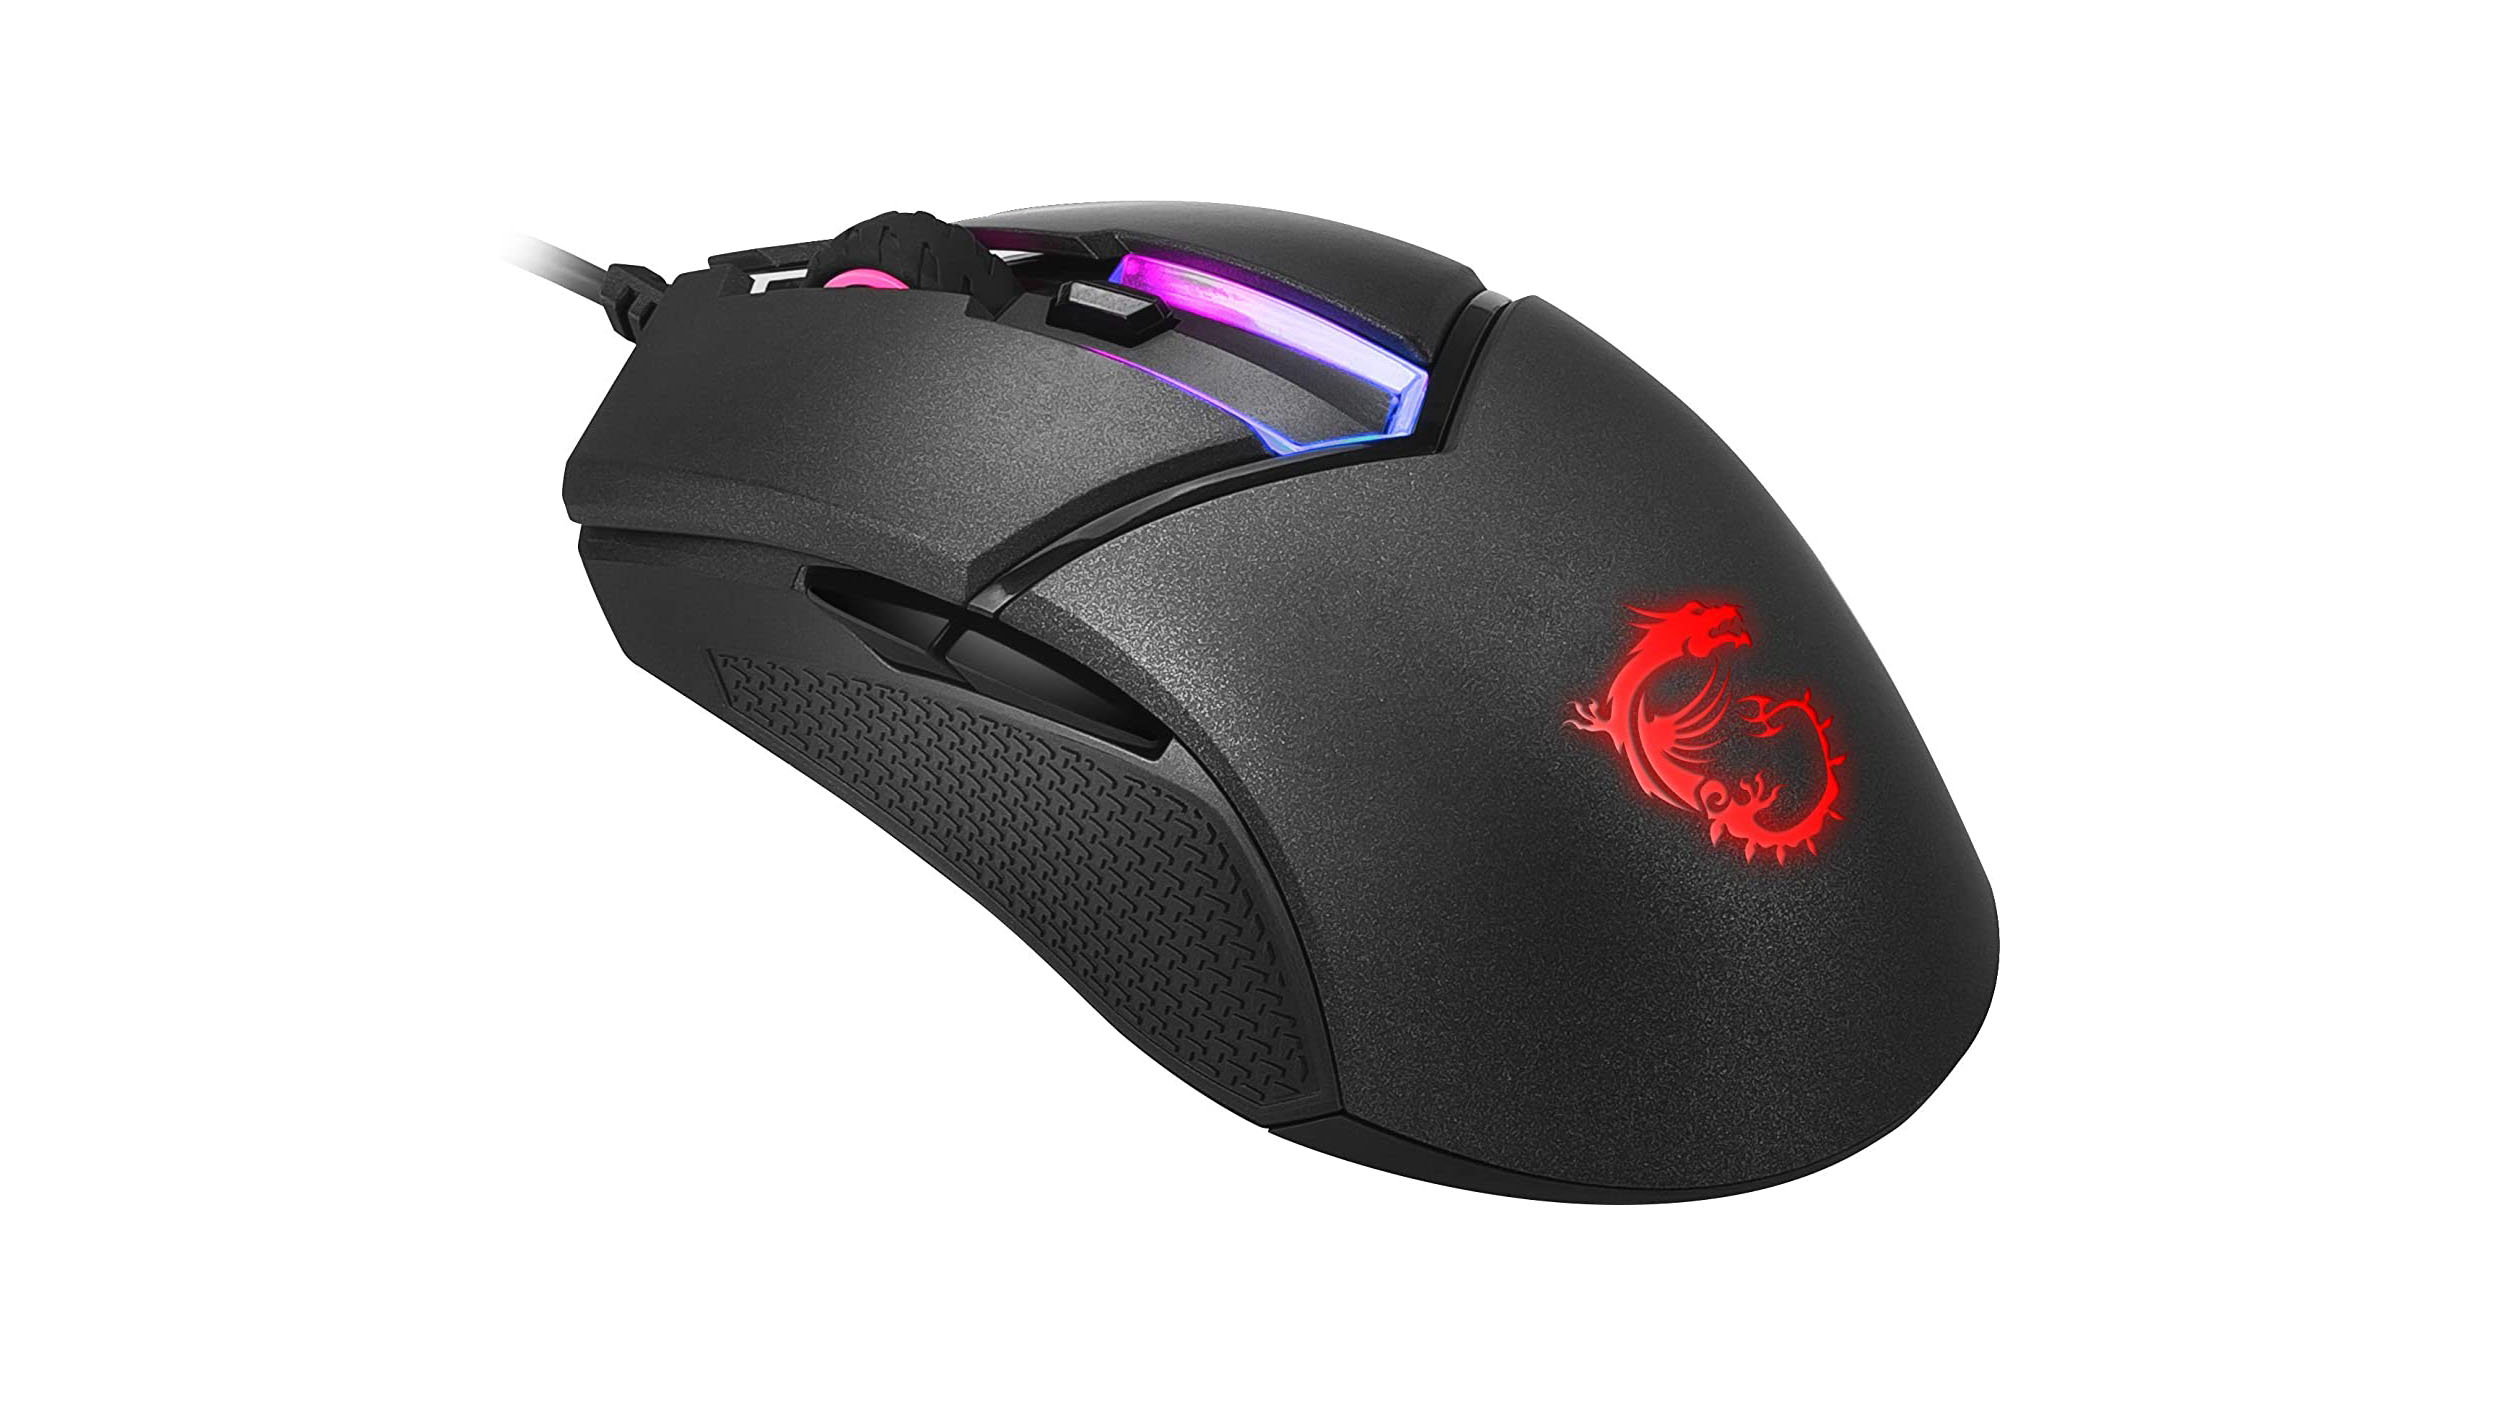 MSI GM30 Clutch is ideal if you want a mid-range gaming mouse.